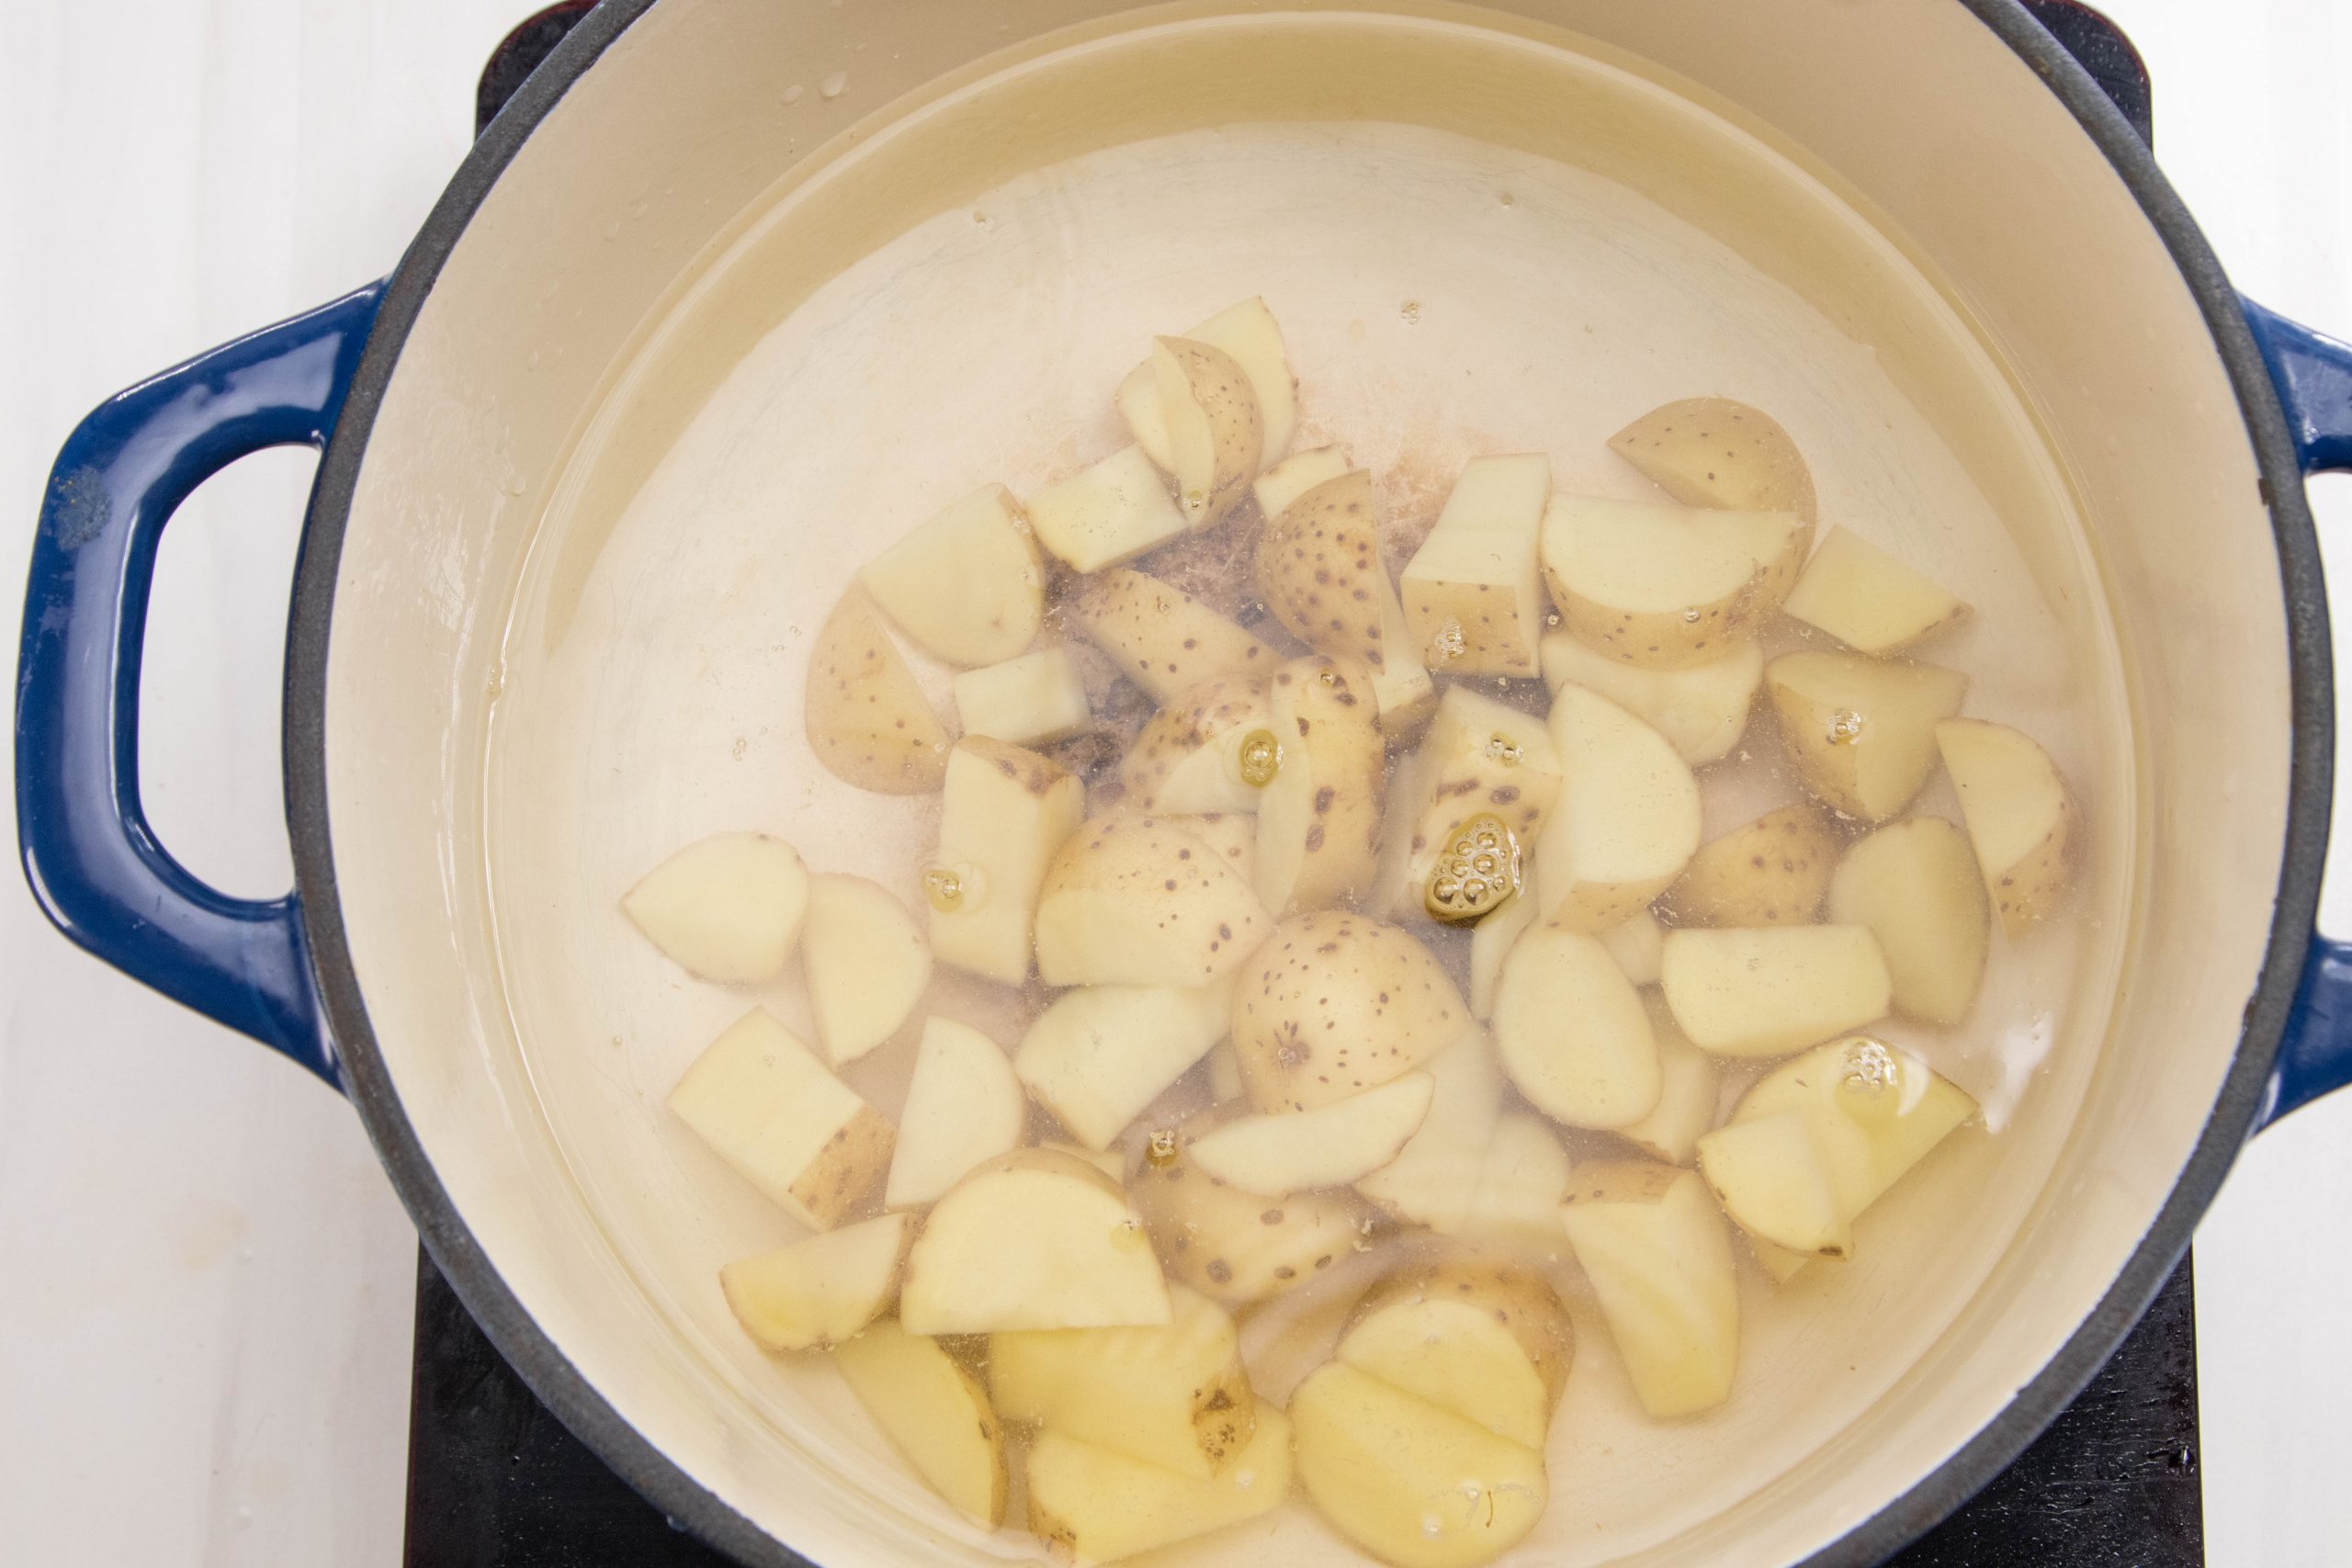 A blue Dutch oven pot filled with water and cut potatoes.